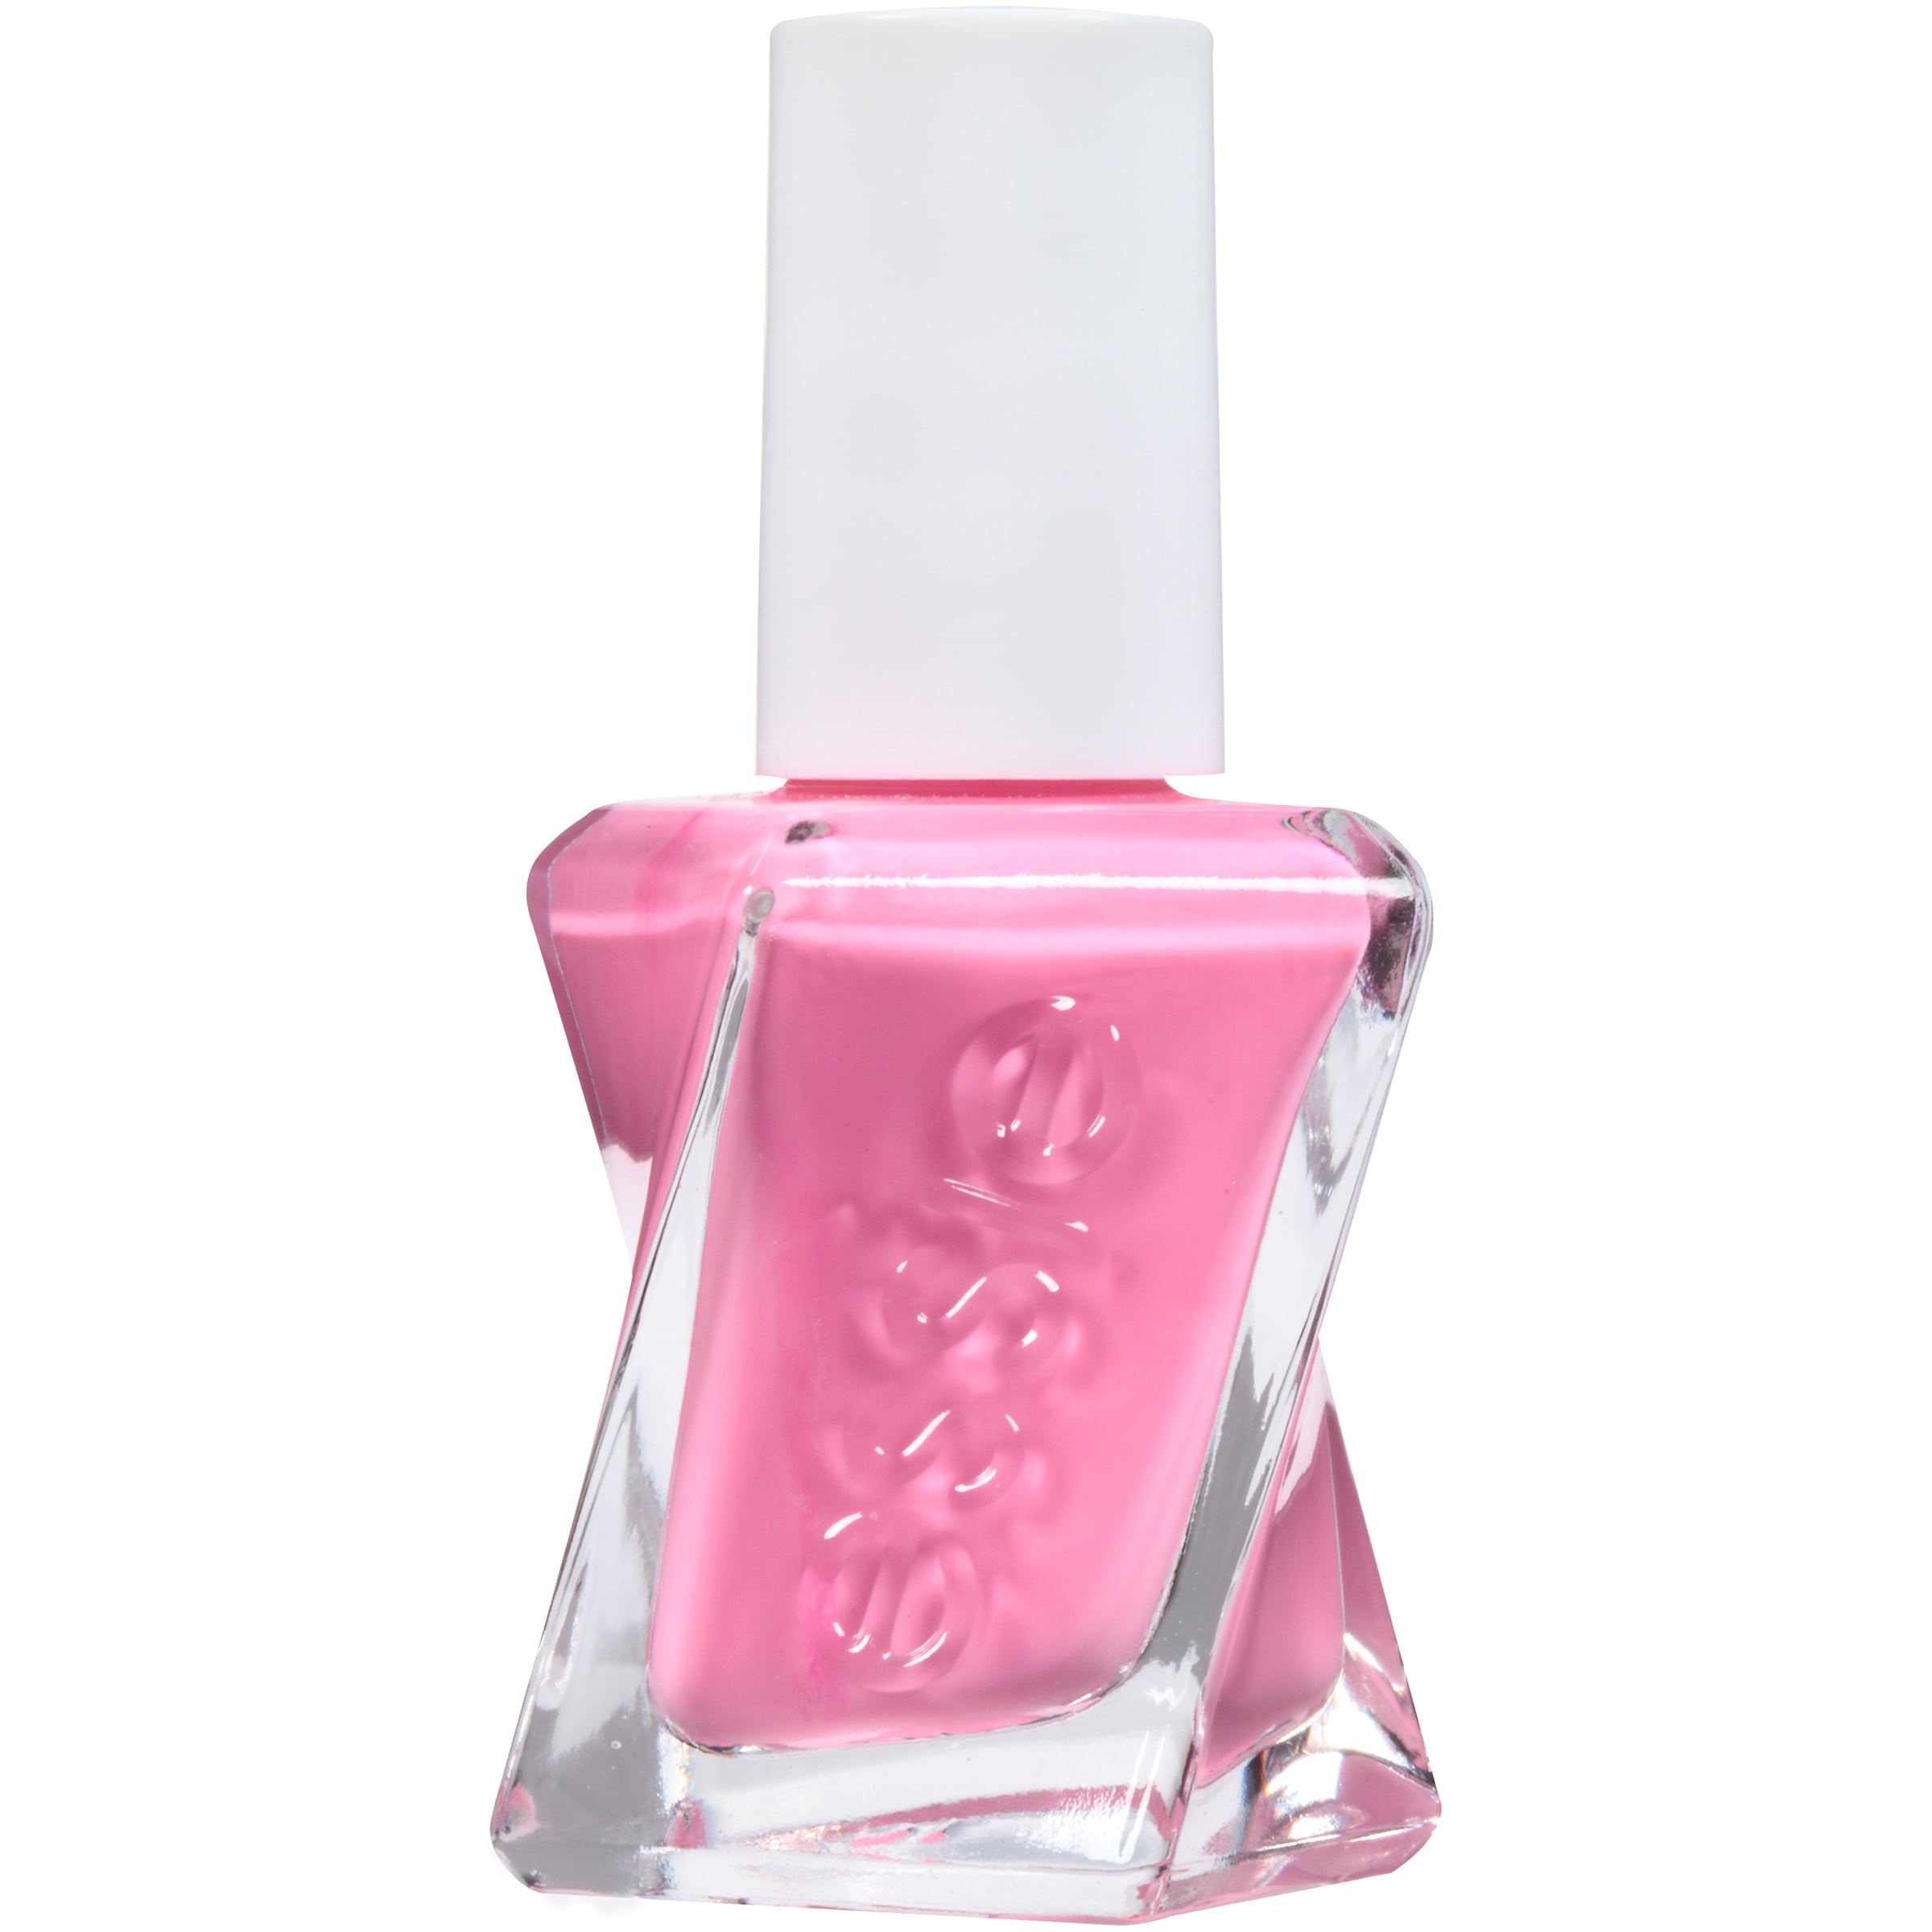 Essie gel couture nail polish, haute to trot, rose pink sheer nail